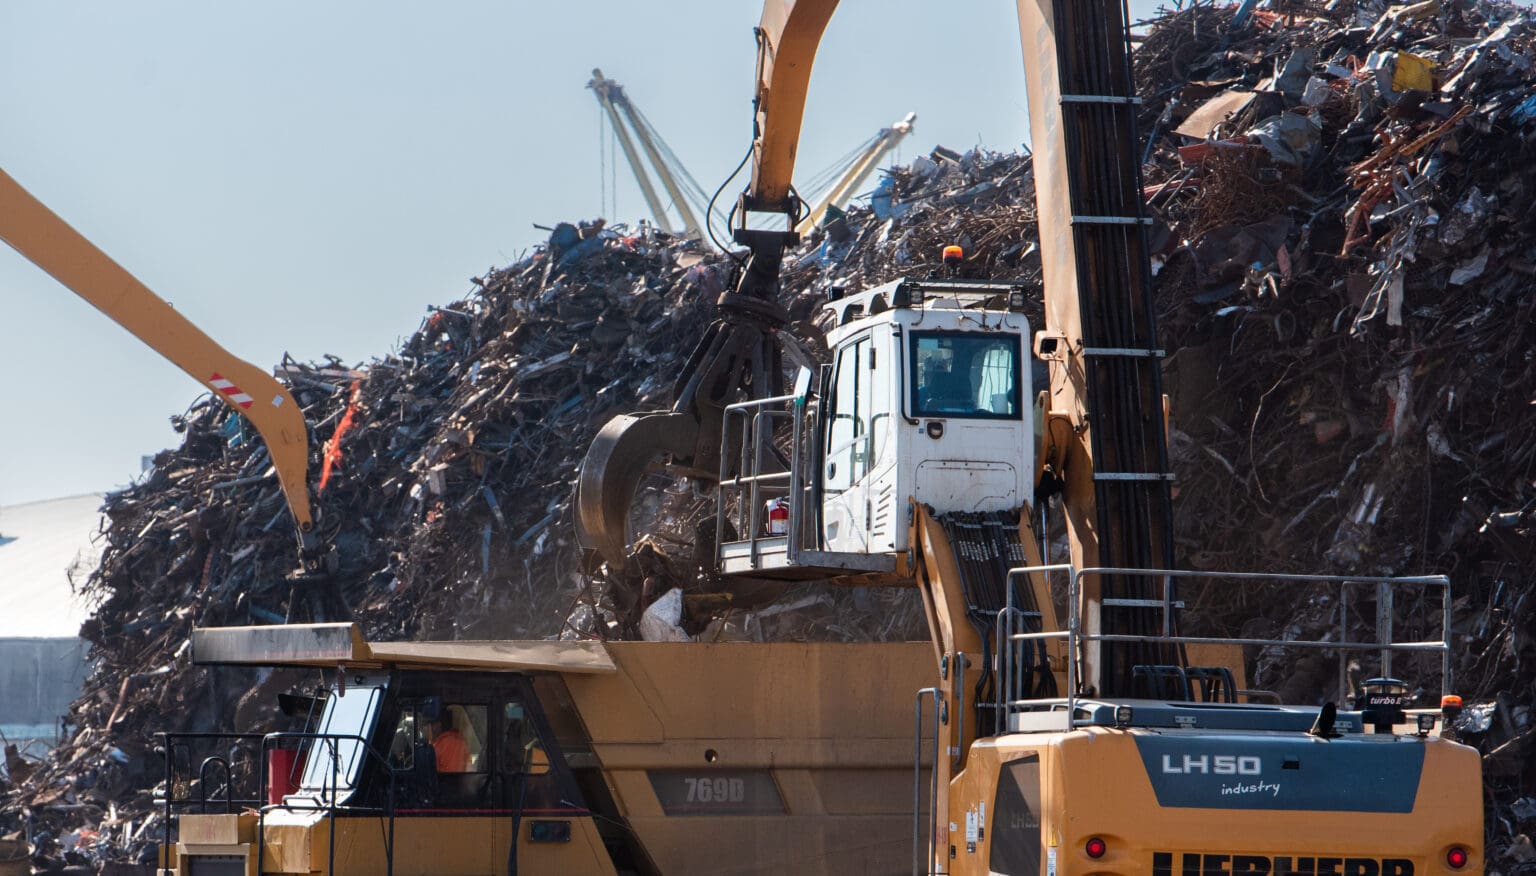 An excavator places scrap metal in a dump truck Sept. 21 at the Bellingham waterfront. A guest commentary about ABC Recycling's plans for the operation left out critical information